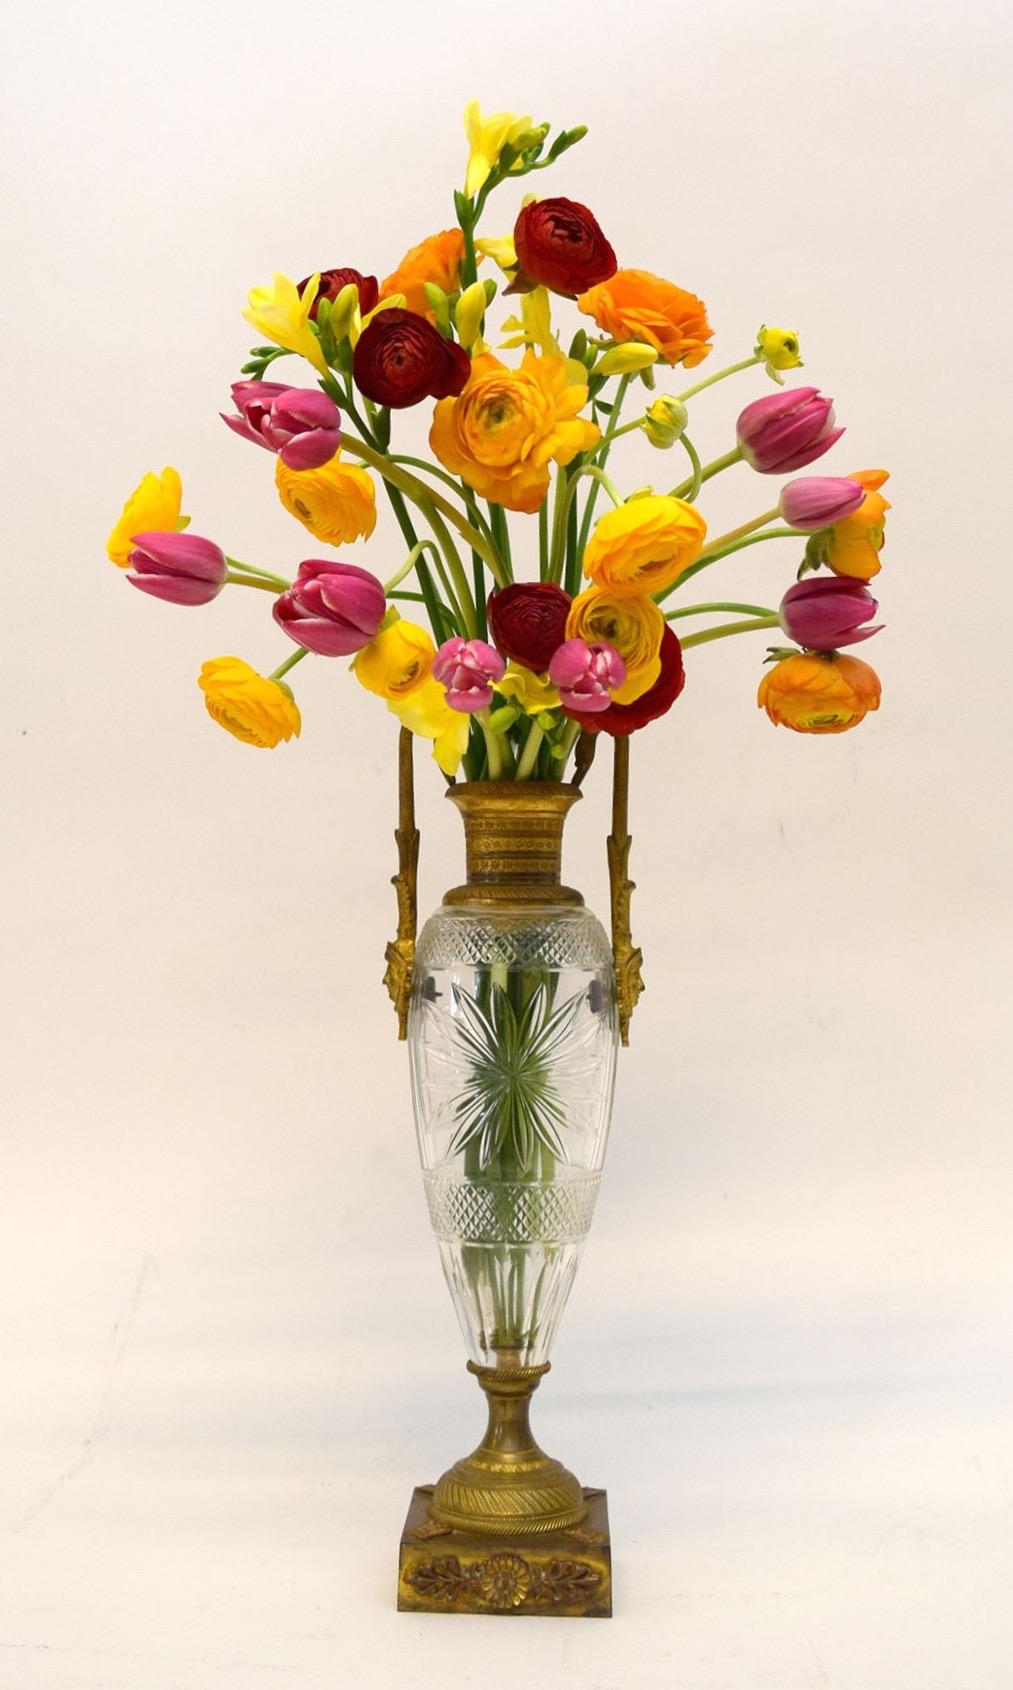 In the early 19th century the typical, but fine flower vase was made of porcelain. The better ones were mounted in gilt bronze. But the most fashionable were of cut crystal and gilt bronze. The vogue for them began in France when Napoleon was